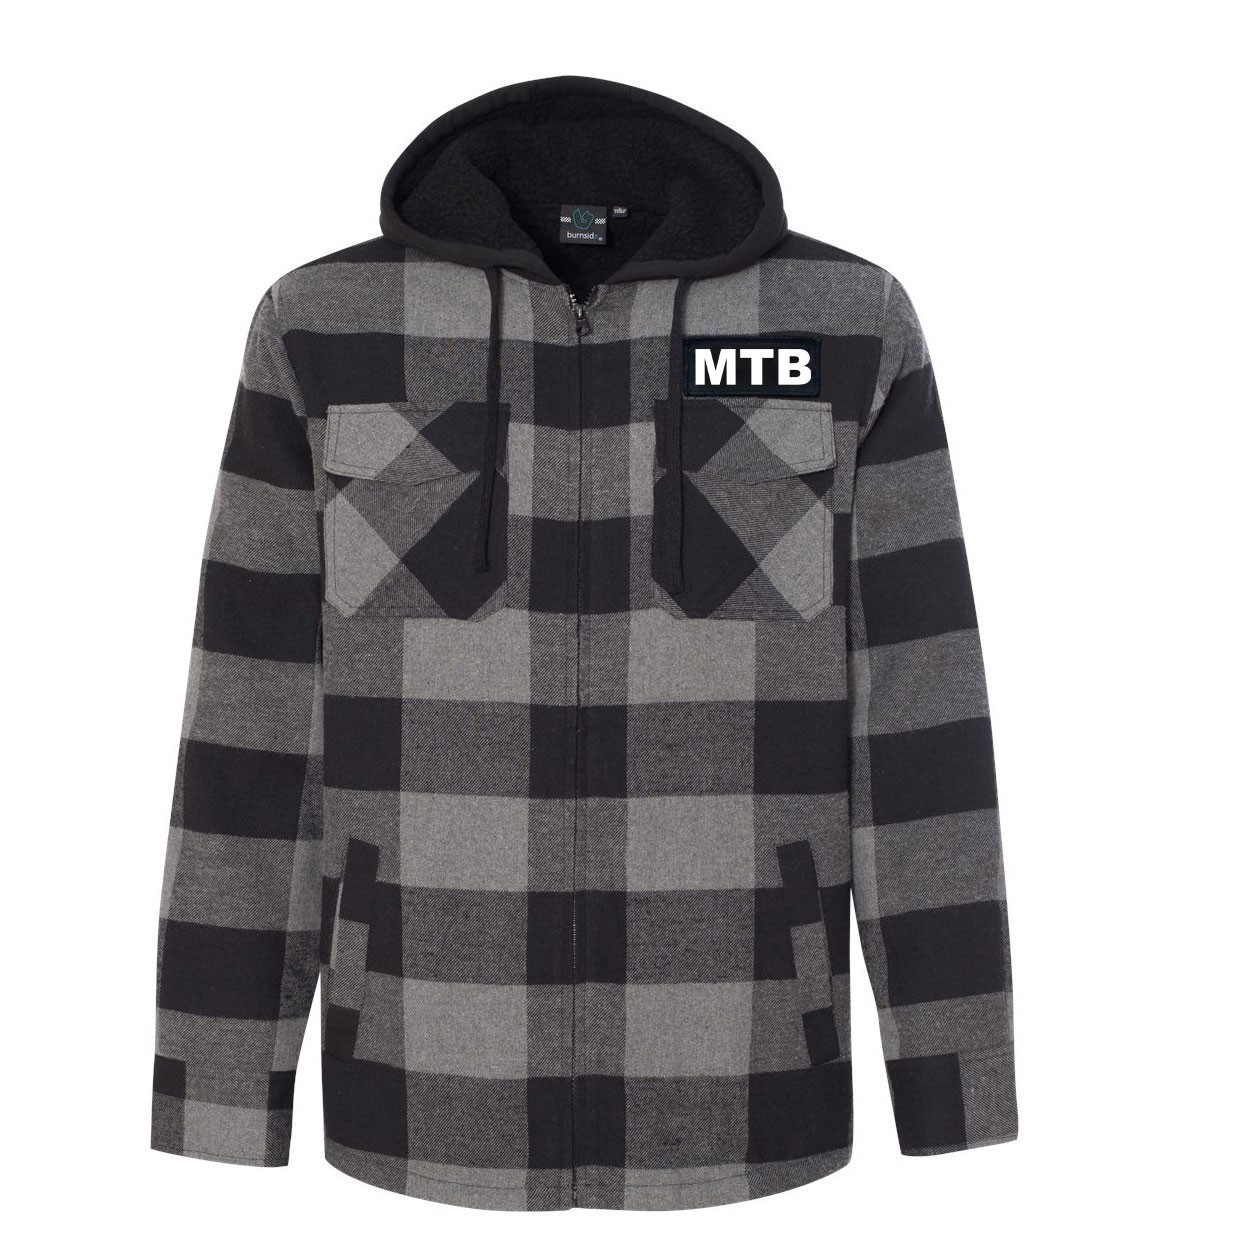 Mtb Brand Logo Classic Unisex Full Zip Woven Patch Hooded Flannel Jacket Black/Gray